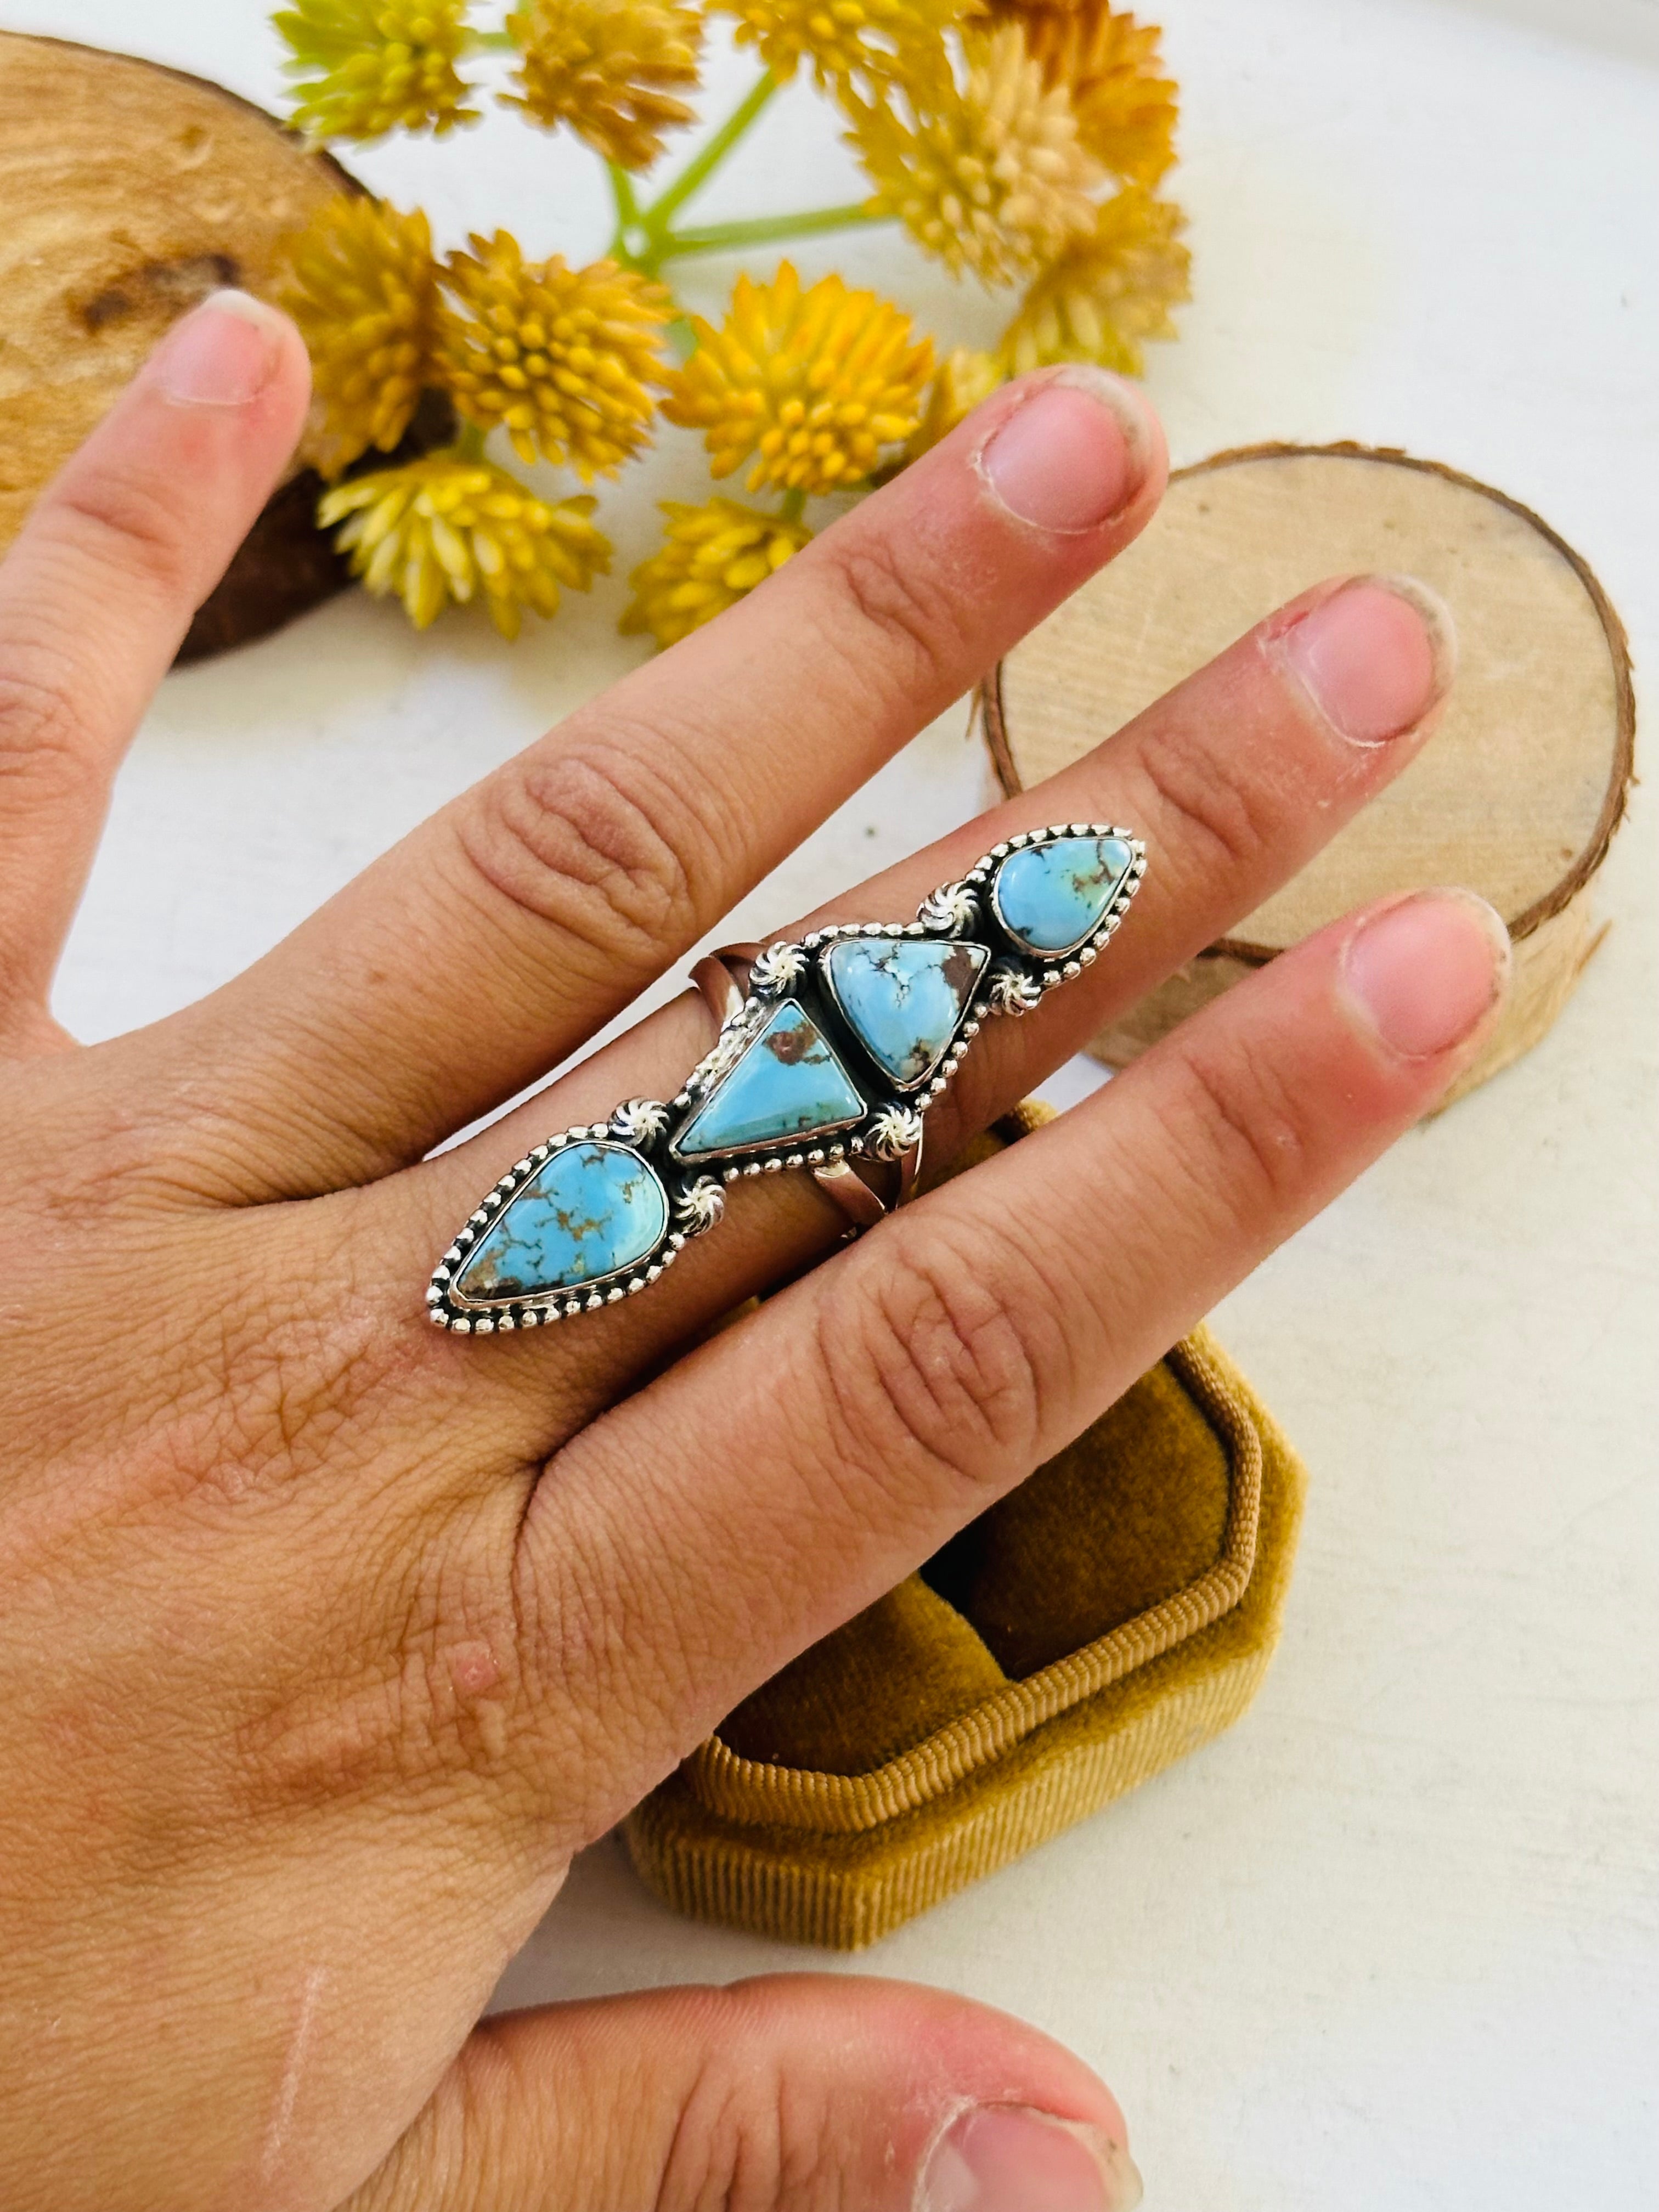 Southwest Handmade Golden Hills Turquoise & Sterling Silver Ring Size 8.75